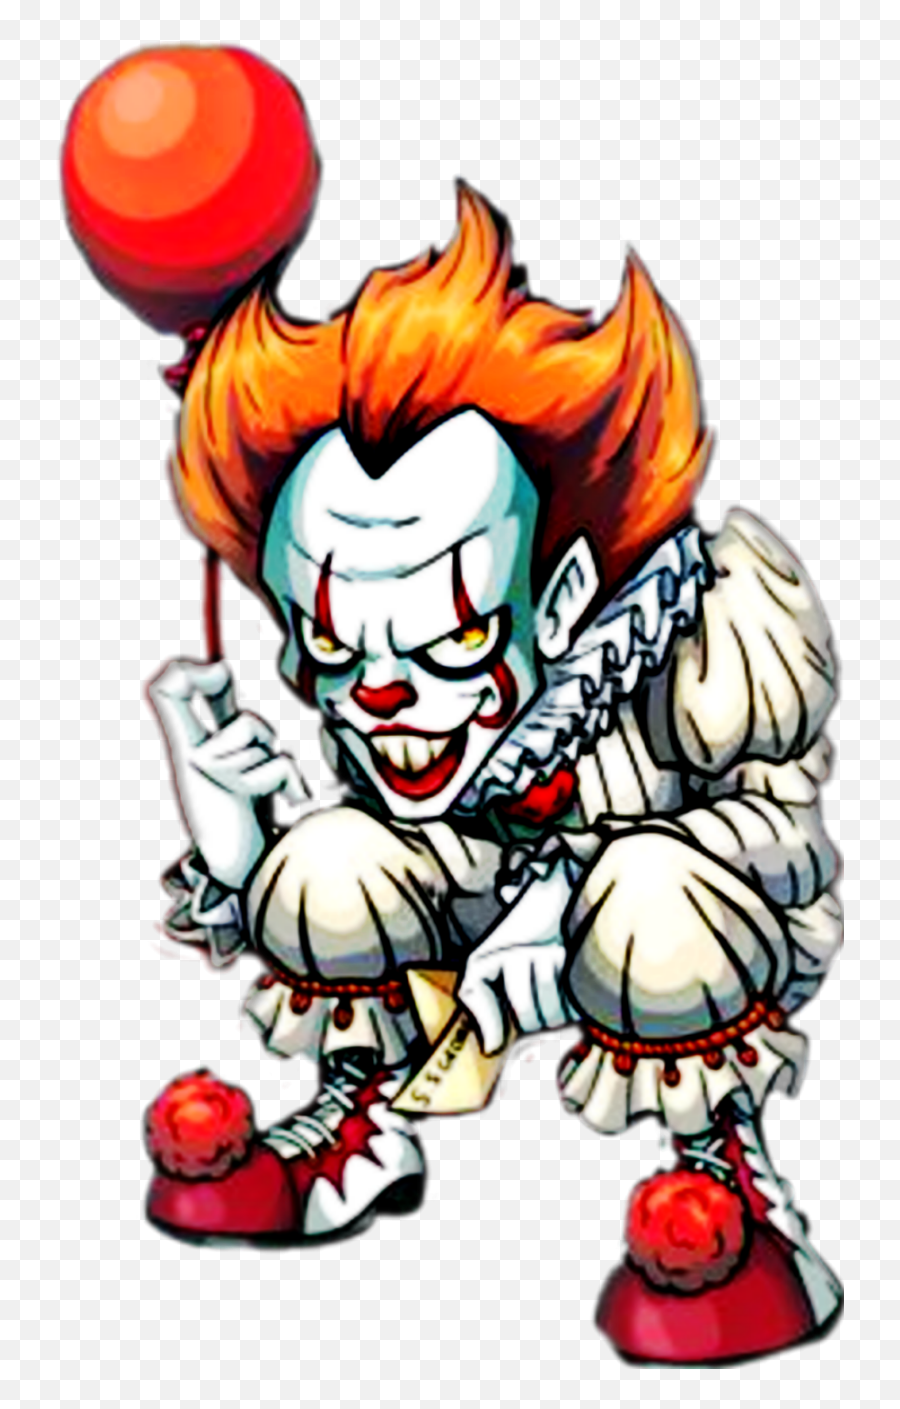 Pennywise Clown Scary It Balloon - Pennywise The Clown Cartoon Emoji,Pennywise Emoji